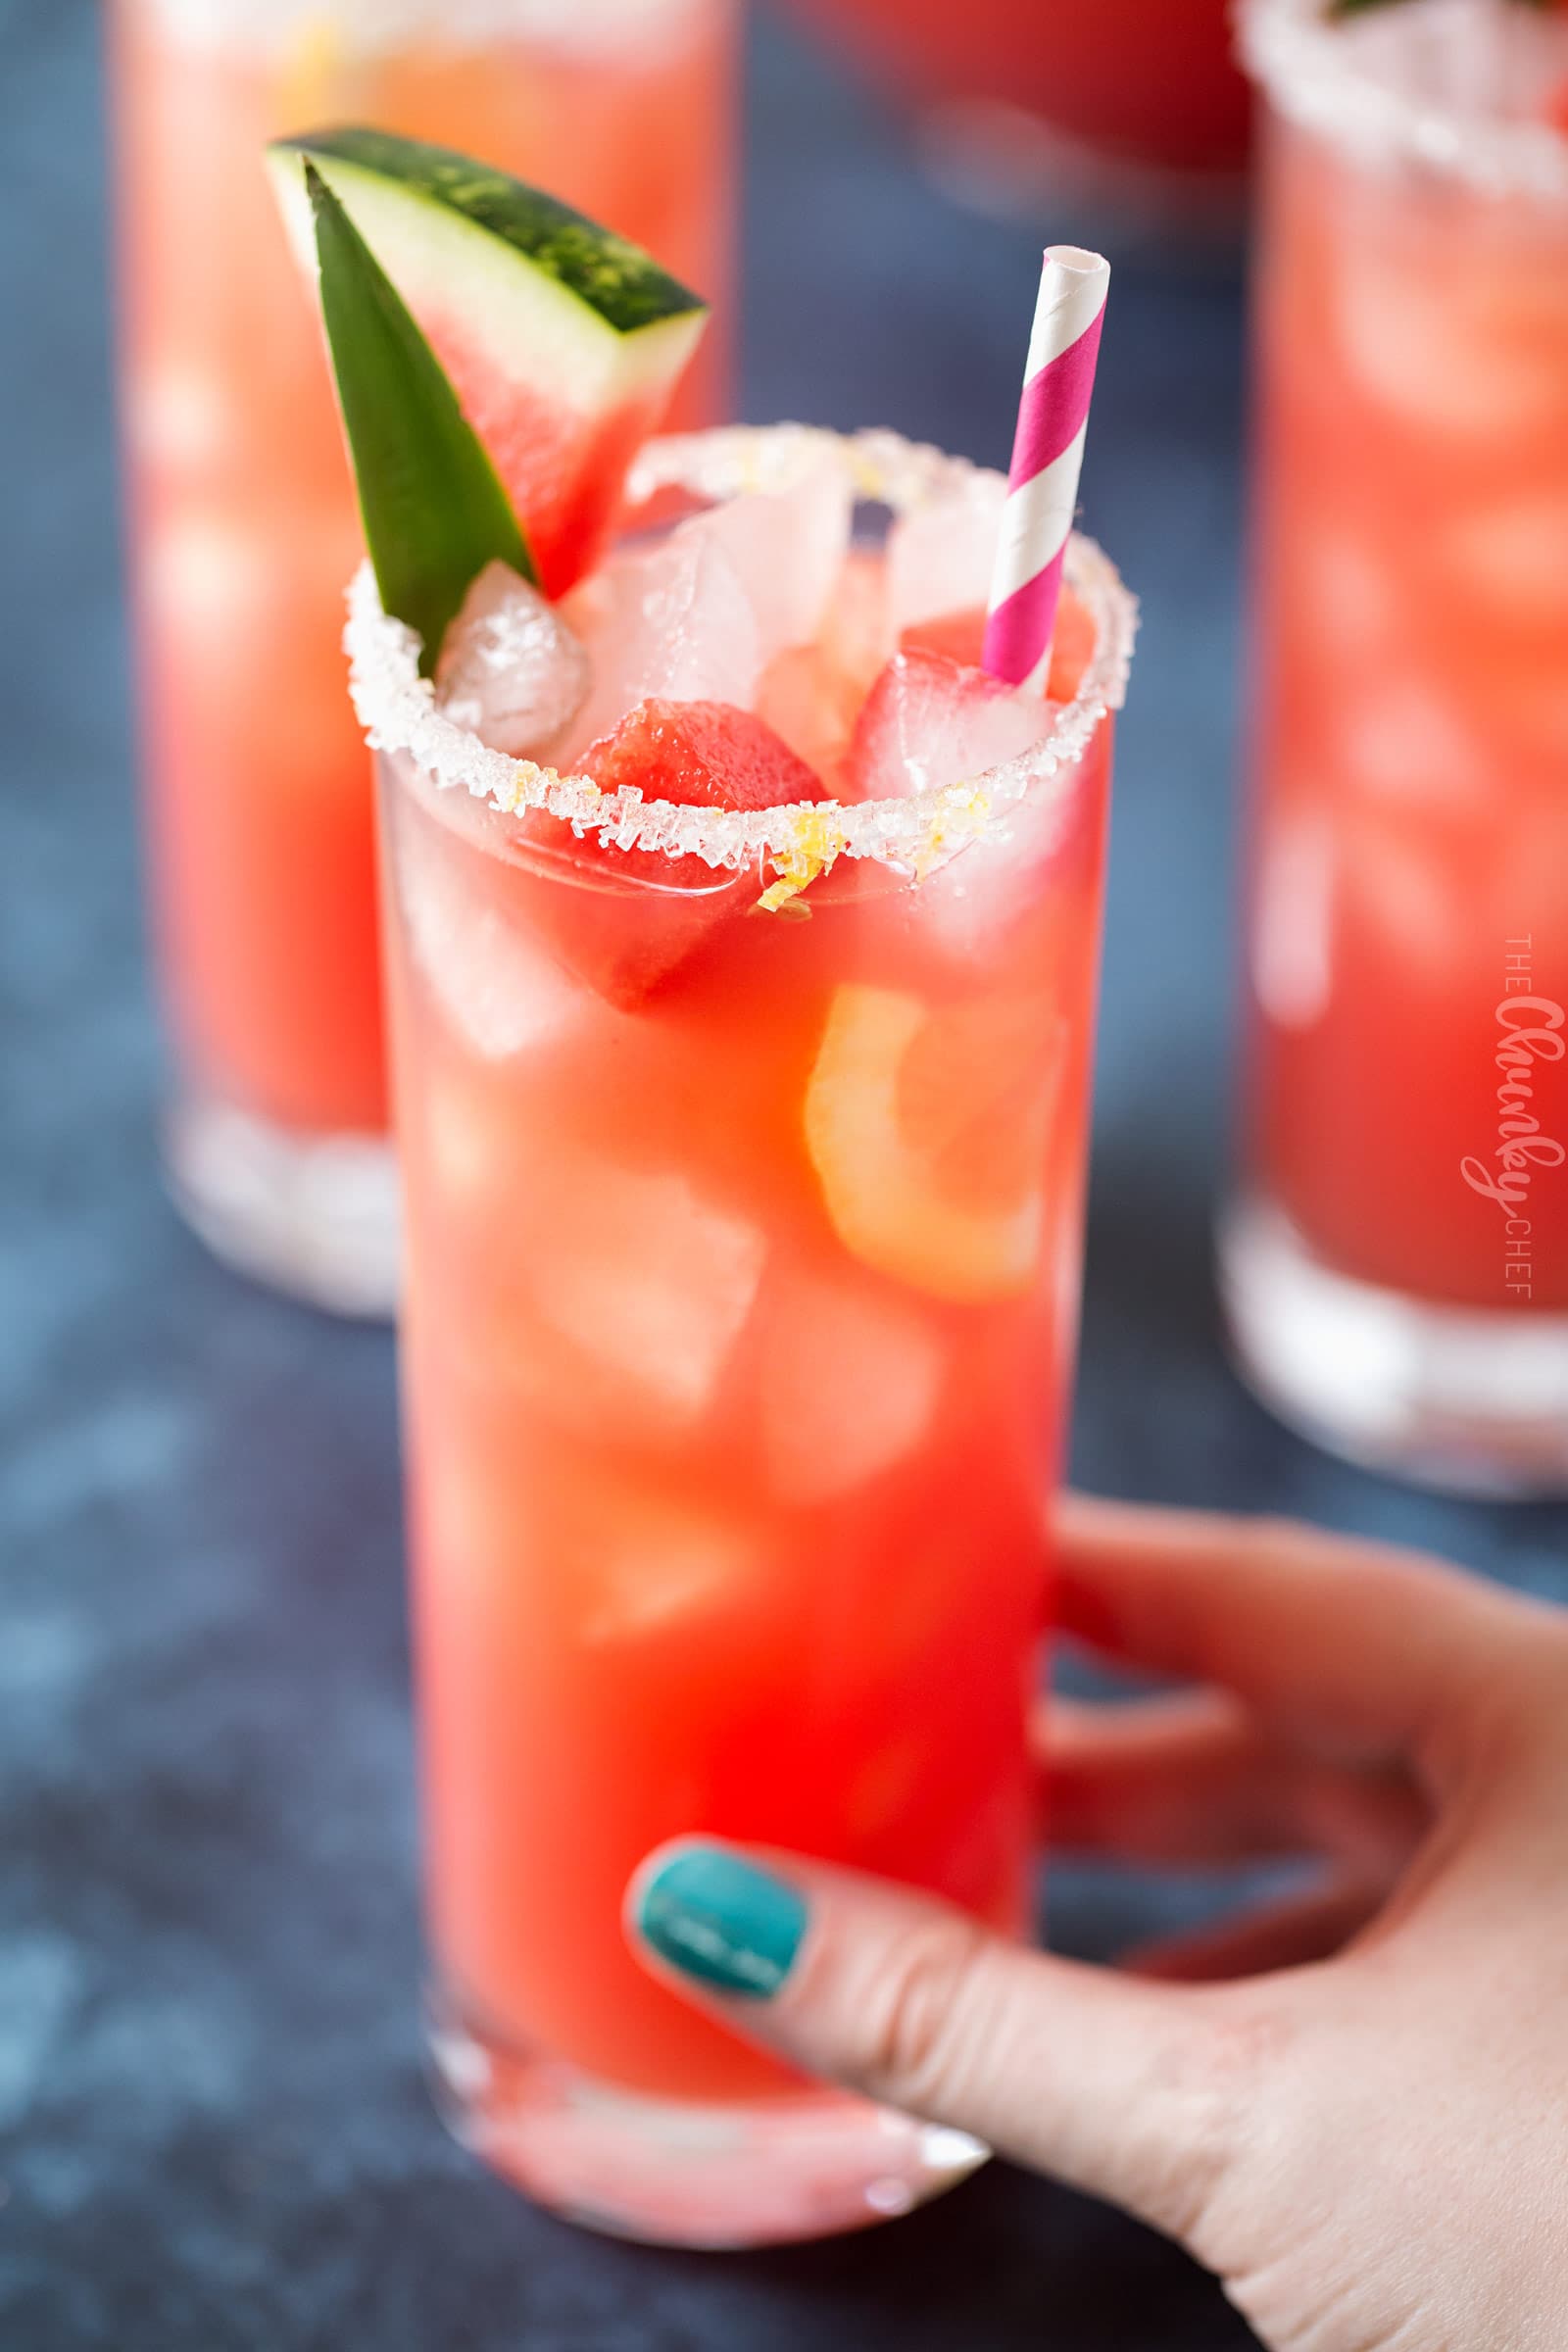 Summer Watermelon Lemonade | Sipping on this refreshing watermelon and pineapple lemonade is like taking a drink of pure summer!  Easy to make, and you can add a bit of alcohol for an adults-only beverage! | http://thechunkychef.com